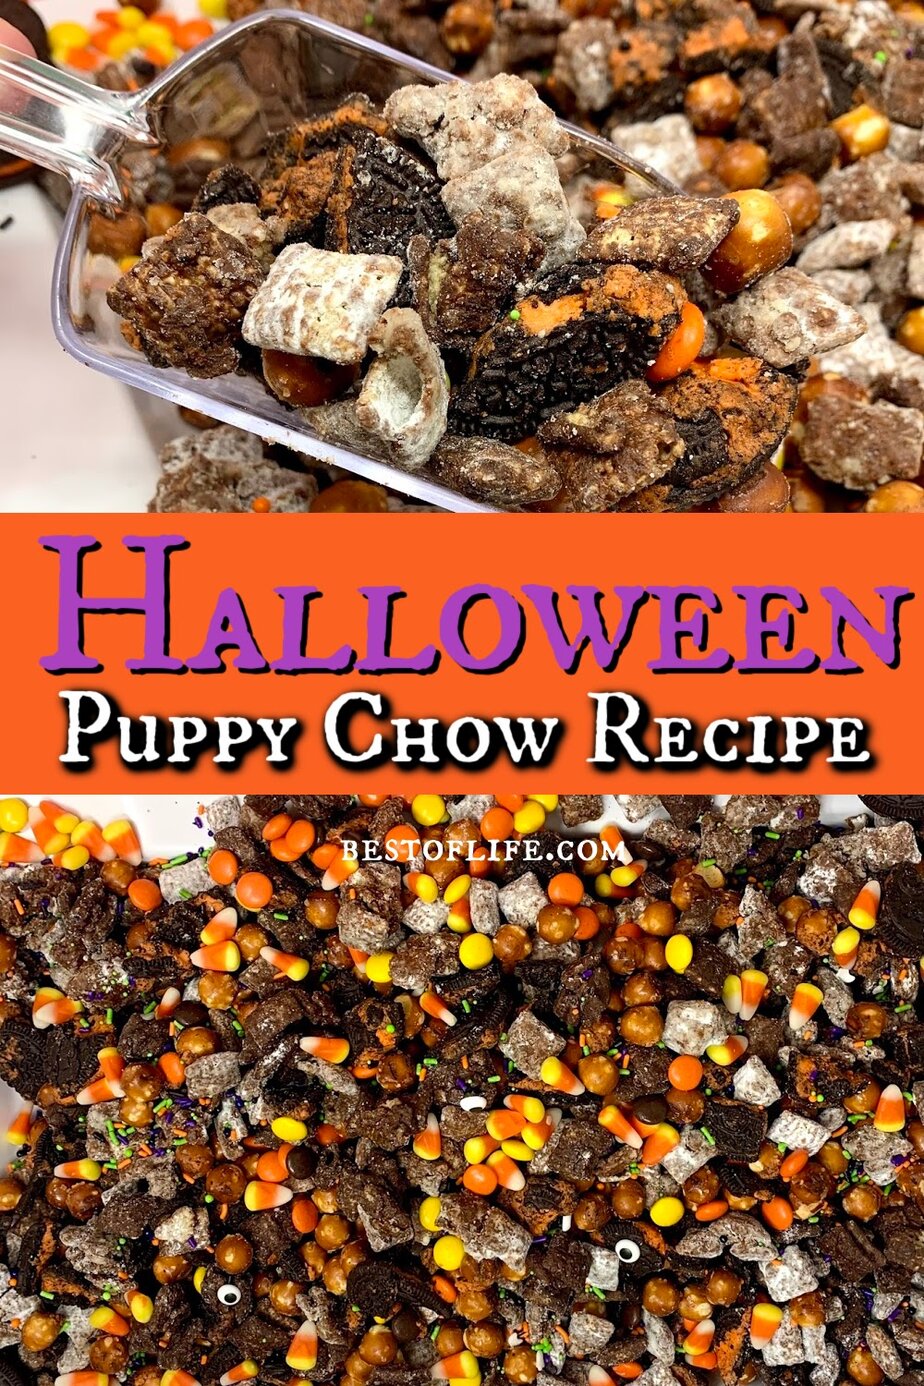 Halloween Puppy Chow Recipe : The Best of Life